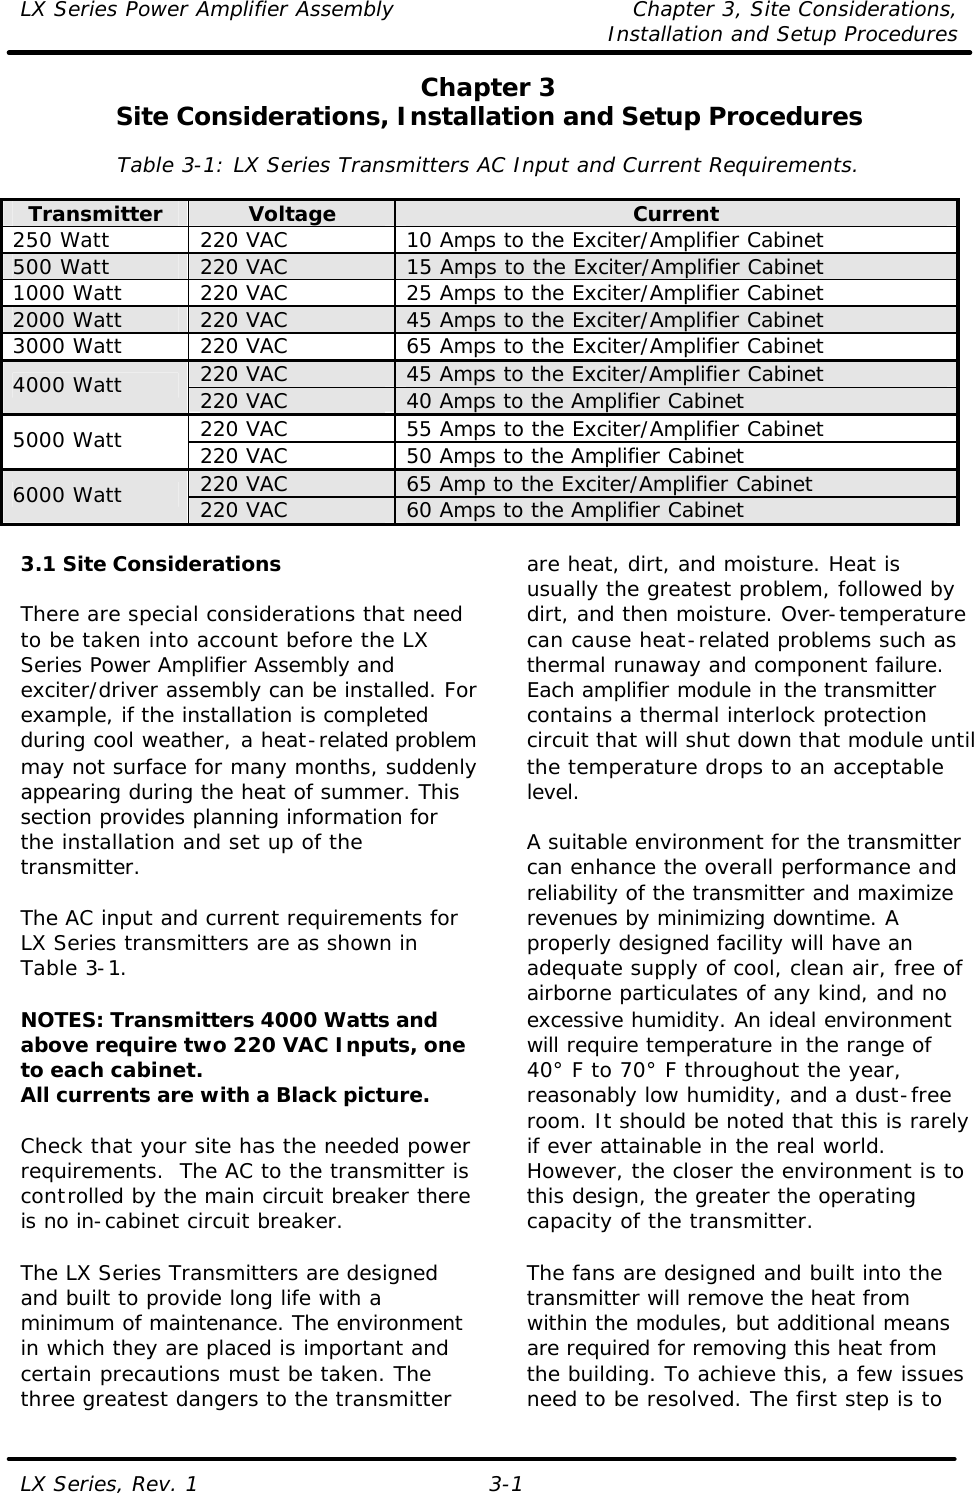 LX Series Power Amplifier Assembly Chapter 3, Site Considerations,   Installation and Setup Procedures LX Series, Rev. 1 3-1 Chapter 3 Site Considerations, Installation and Setup Procedures  Table 3-1: LX Series Transmitters AC Input and Current Requirements.  Transmitter Voltage Current 250 Watt 220 VAC 10 Amps to the Exciter/Amplifier Cabinet 500 Watt 220 VAC 15 Amps to the Exciter/Amplifier Cabinet 1000 Watt 220 VAC 25 Amps to the Exciter/Amplifier Cabinet 2000 Watt 220 VAC 45 Amps to the Exciter/Amplifier Cabinet 3000 Watt 220 VAC 65 Amps to the Exciter/Amplifier Cabinet 220 VAC 45 Amps to the Exciter/Amplifier Cabinet 4000 Watt 220 VAC 40 Amps to the Amplifier Cabinet 220 VAC 55 Amps to the Exciter/Amplifier Cabinet 5000 Watt 220 VAC 50 Amps to the Amplifier Cabinet 220 VAC 65 Amp to the Exciter/Amplifier Cabinet 6000 Watt 220 VAC 60 Amps to the Amplifier Cabinet  3.1 Site Considerations  There are special considerations that need to be taken into account before the LX Series Power Amplifier Assembly and exciter/driver assembly can be installed. For example, if the installation is completed during cool weather, a heat-related problem may not surface for many months, suddenly appearing during the heat of summer. This section provides planning information for the installation and set up of the transmitter.  The AC input and current requirements for LX Series transmitters are as shown in Table 3-1.  NOTES: Transmitters 4000 Watts and above require two 220 VAC Inputs, one to each cabinet. All currents are with a Black picture.  Check that your site has the needed power requirements.  The AC to the transmitter is controlled by the main circuit breaker there is no in-cabinet circuit breaker.  The LX Series Transmitters are designed and built to provide long life with a minimum of maintenance. The environment in which they are placed is important and certain precautions must be taken. The three greatest dangers to the transmitter are heat, dirt, and moisture. Heat is usually the greatest problem, followed by dirt, and then moisture. Over-temperature can cause heat-related problems such as thermal runaway and component failure. Each amplifier module in the transmitter contains a thermal interlock protection circuit that will shut down that module until the temperature drops to an acceptable level.  A suitable environment for the transmitter can enhance the overall performance and reliability of the transmitter and maximize revenues by minimizing downtime. A properly designed facility will have an adequate supply of cool, clean air, free of airborne particulates of any kind, and no excessive humidity. An ideal environment will require temperature in the range of 40° F to 70° F throughout the year, reasonably low humidity, and a dust-free room. It should be noted that this is rarely if ever attainable in the real world. However, the closer the environment is to this design, the greater the operating capacity of the transmitter.  The fans are designed and built into the transmitter will remove the heat from within the modules, but additional means are required for removing this heat from the building. To achieve this, a few issues need to be resolved. The first step is to 